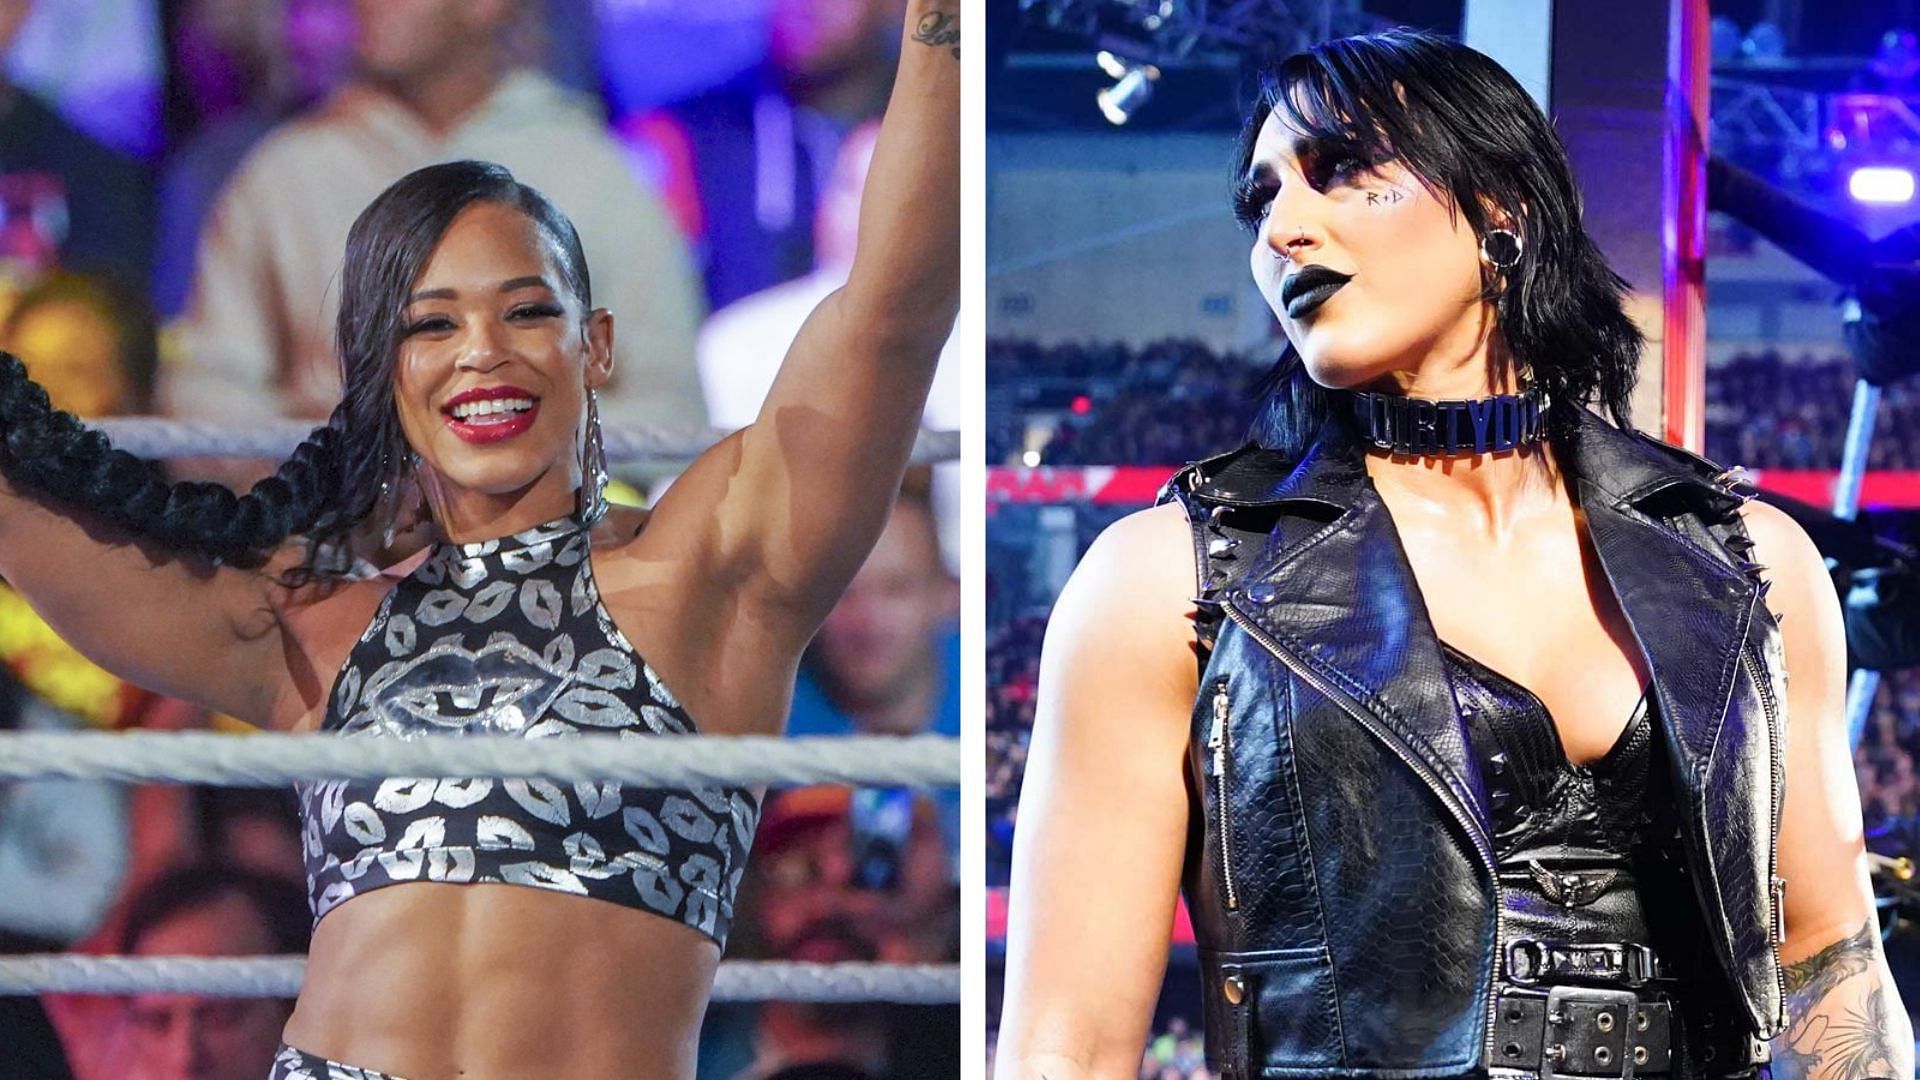 Bianca Belair had an up and down 2023 in WWE, will her 2024 be better?